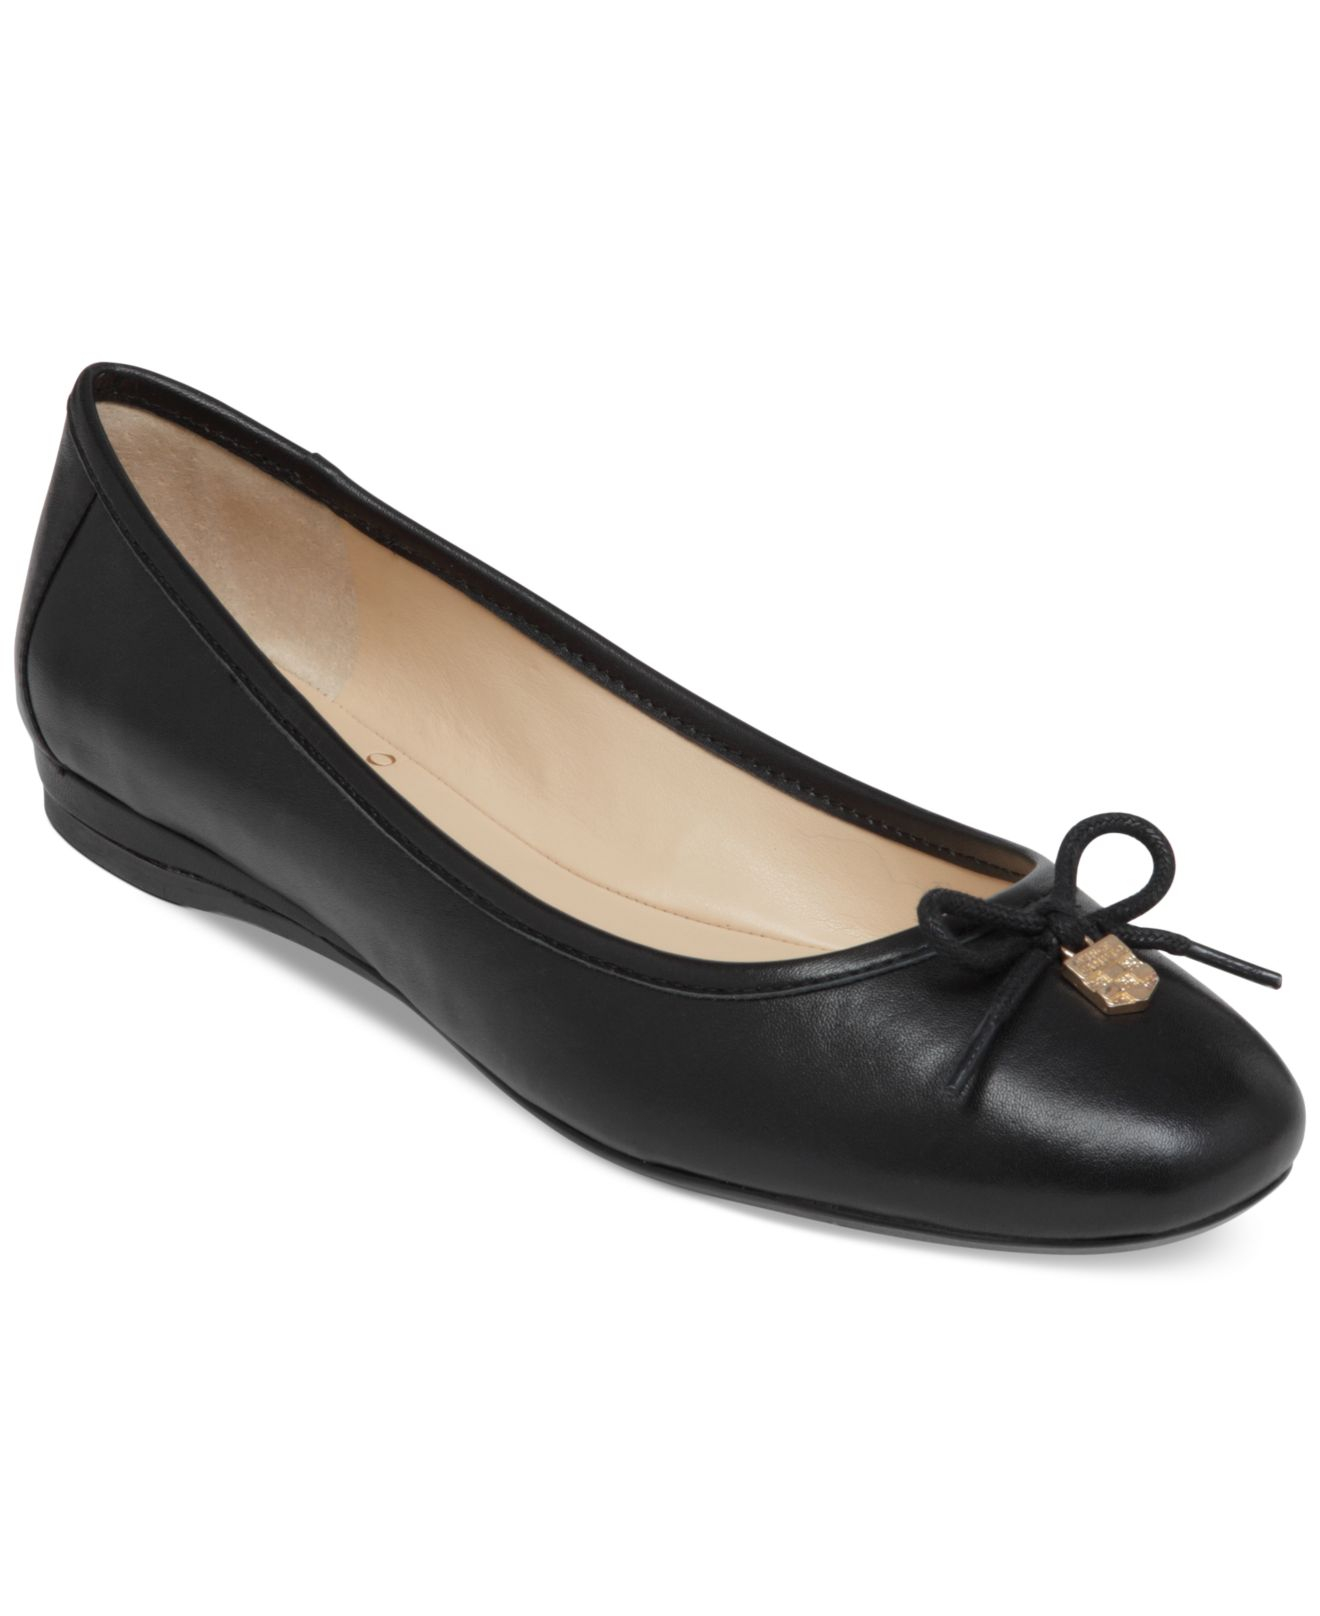 Vince Camuto Ria Flats in Black - Lyst